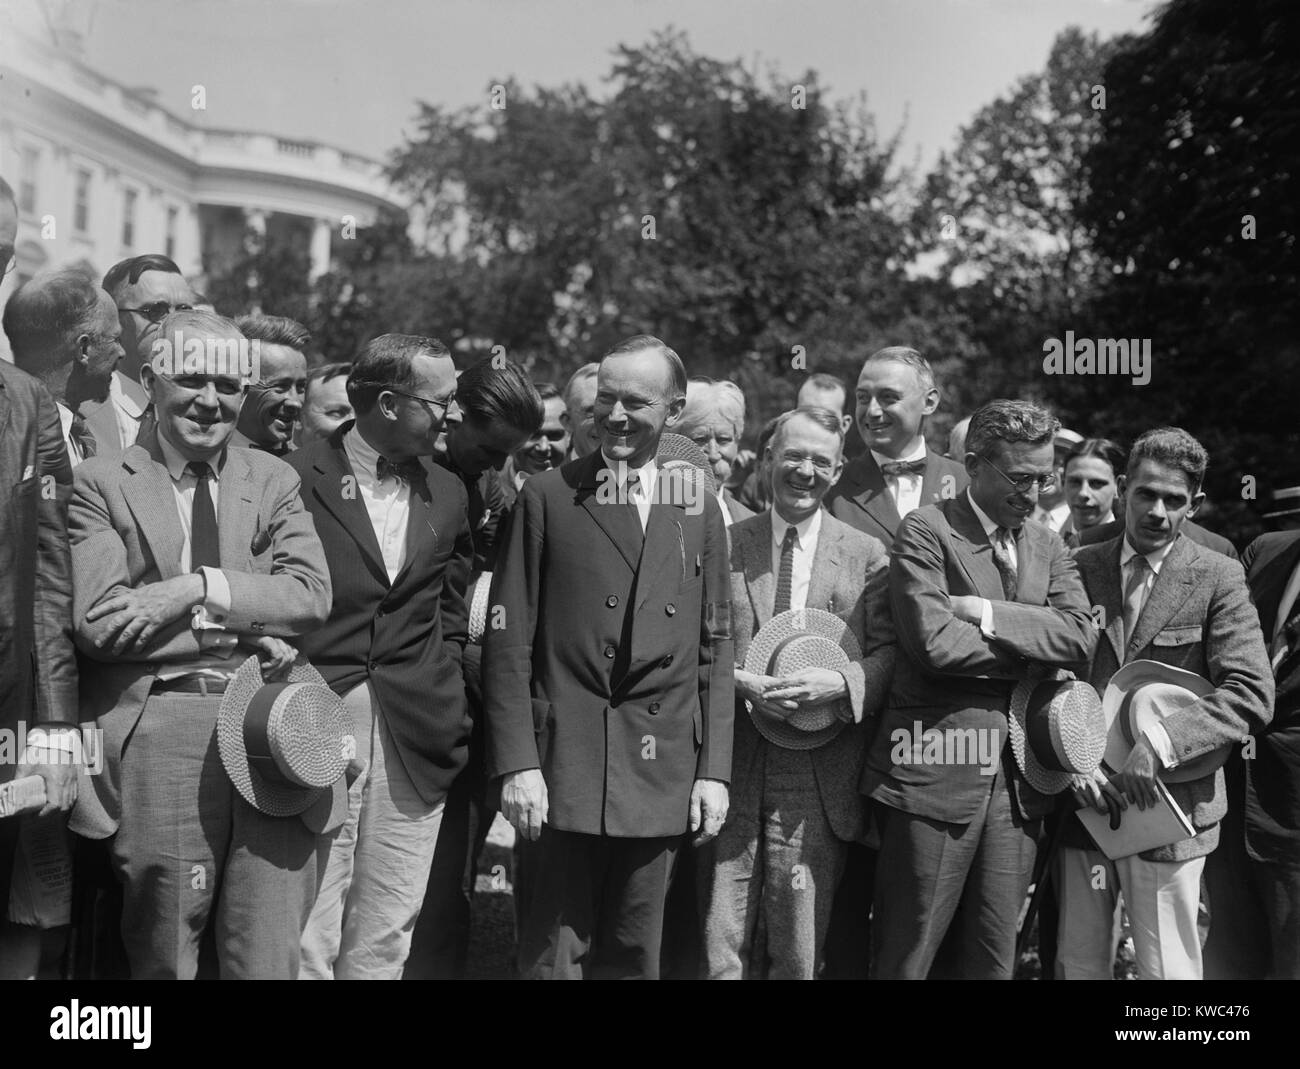 President Calvin Coolidge talking with Newspapermen at the White House, Aug. 14, 1923. Coolidge is wearing a mourning band on his sleeve for the late President Warren Harding who died less than two weeks earlier. (BSLOC 2015 15 115) Stock Photo